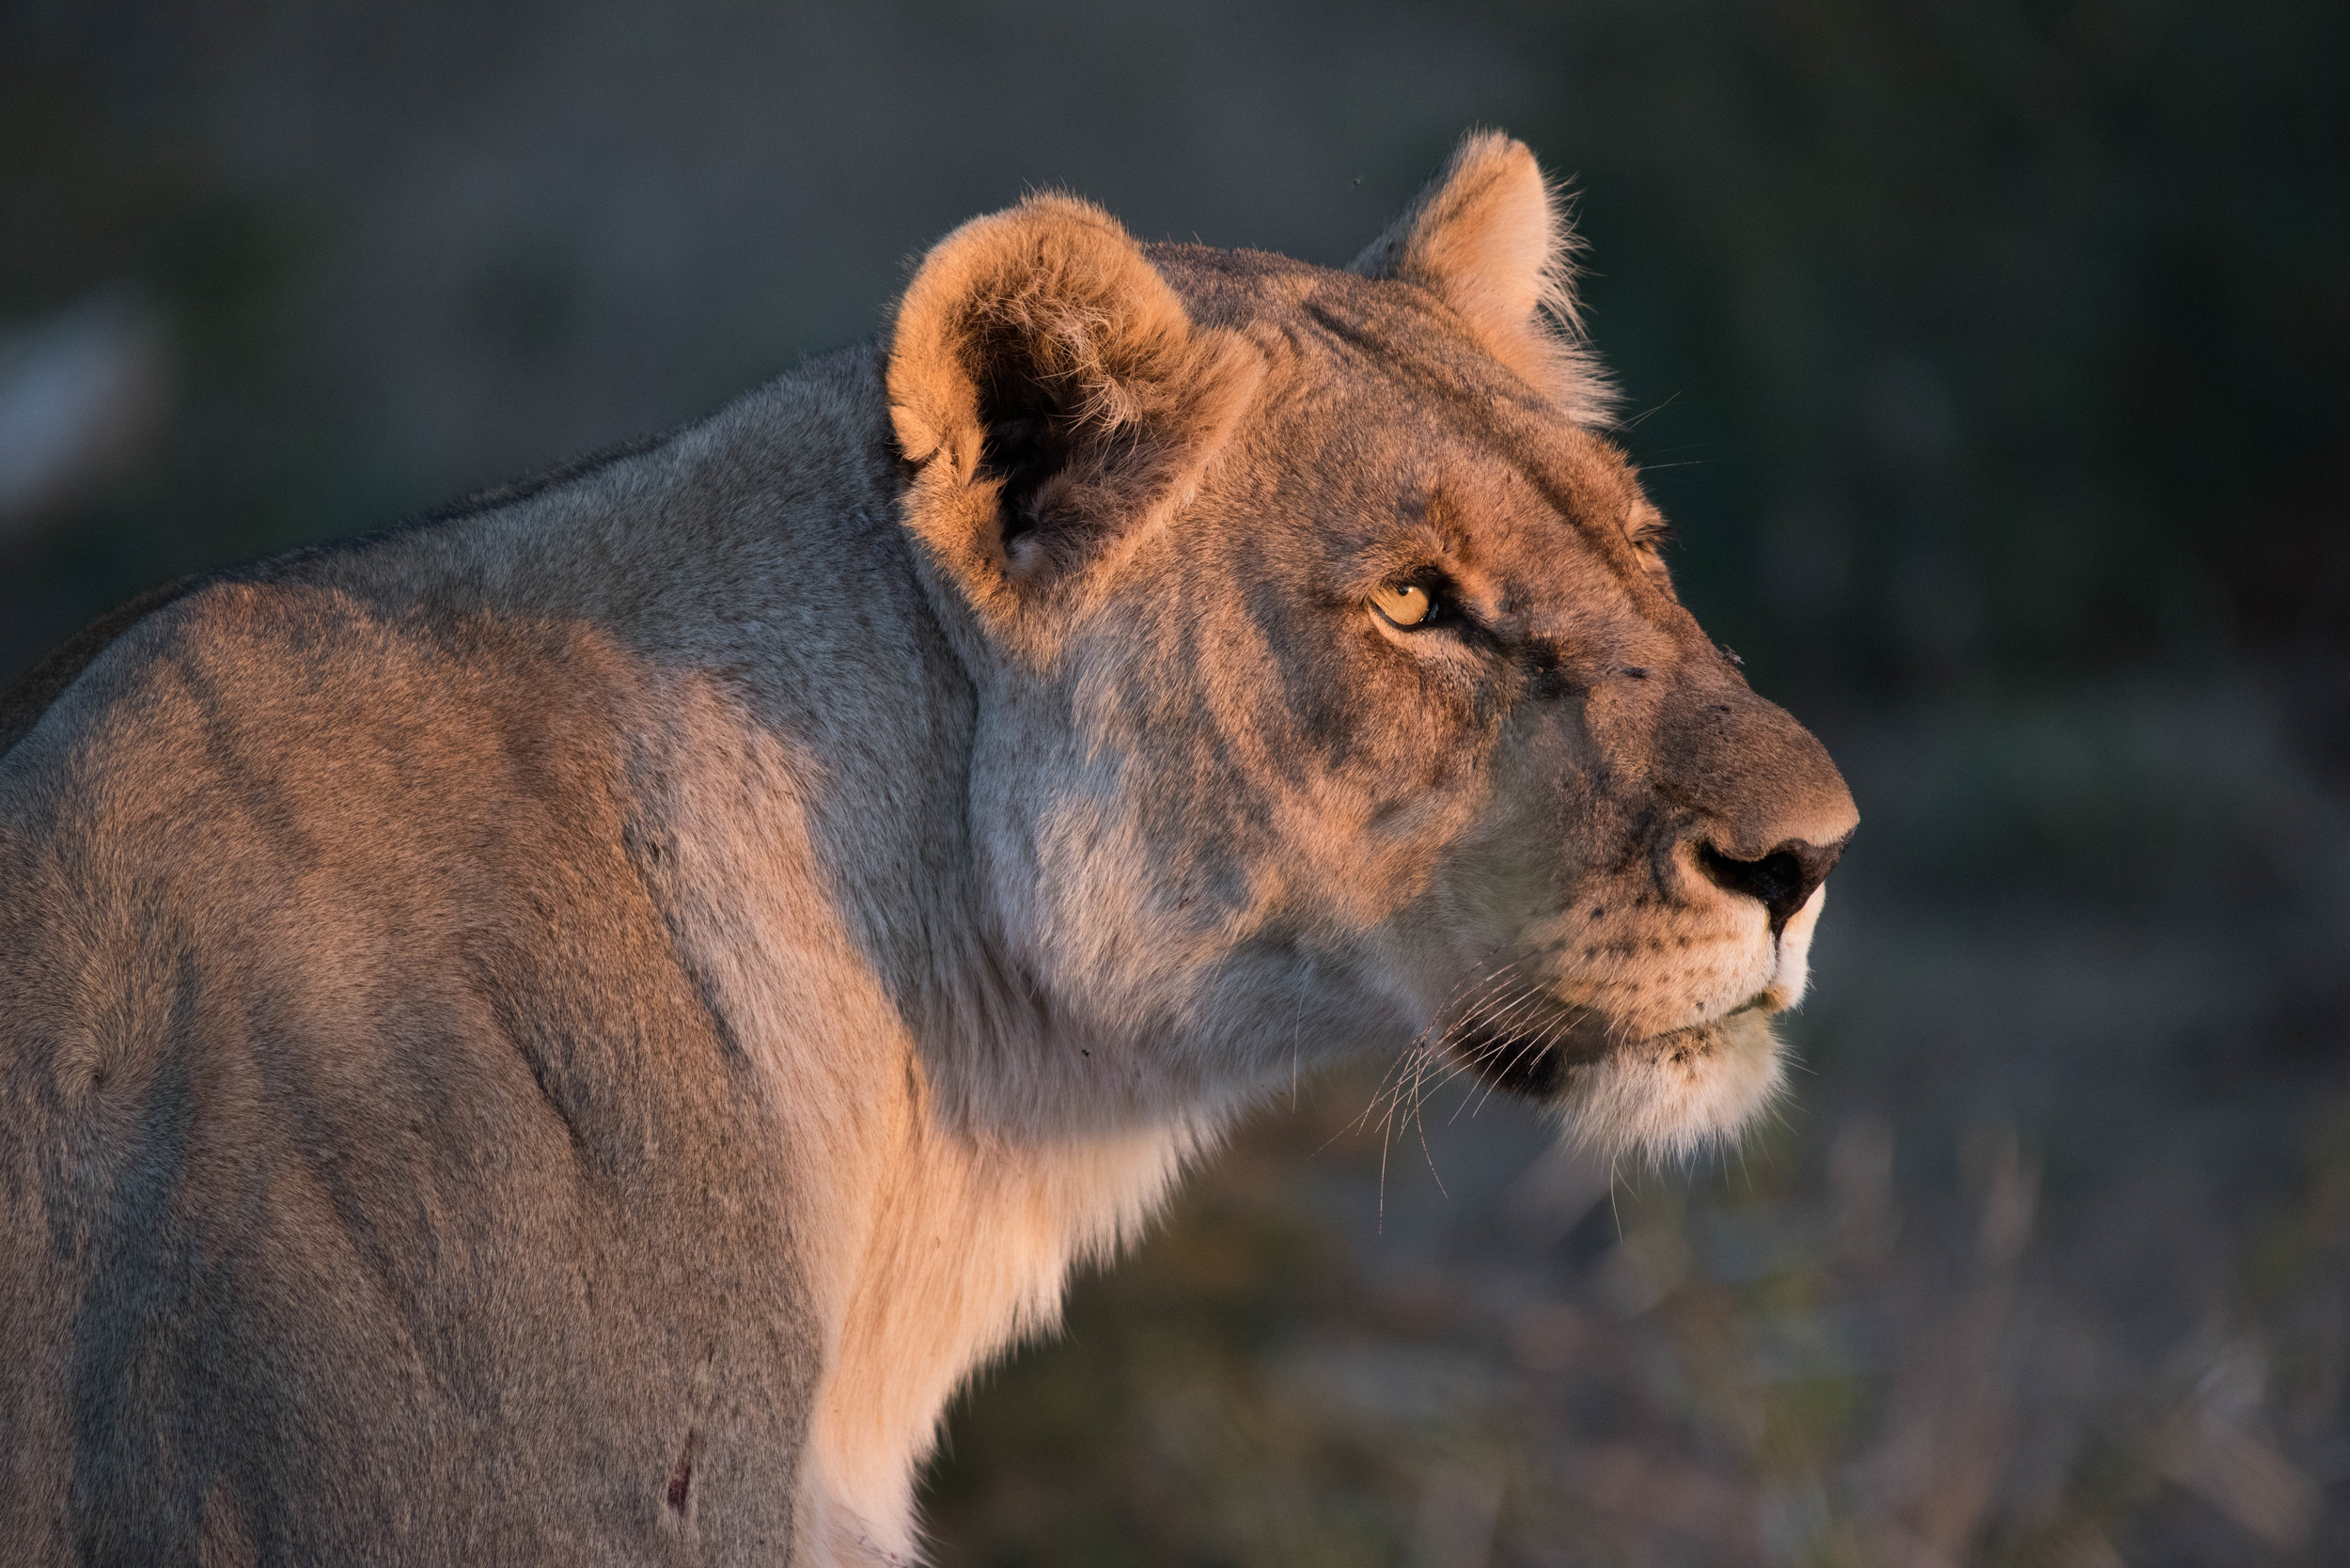 Lion, Madikwe Game Reserve, South Africa